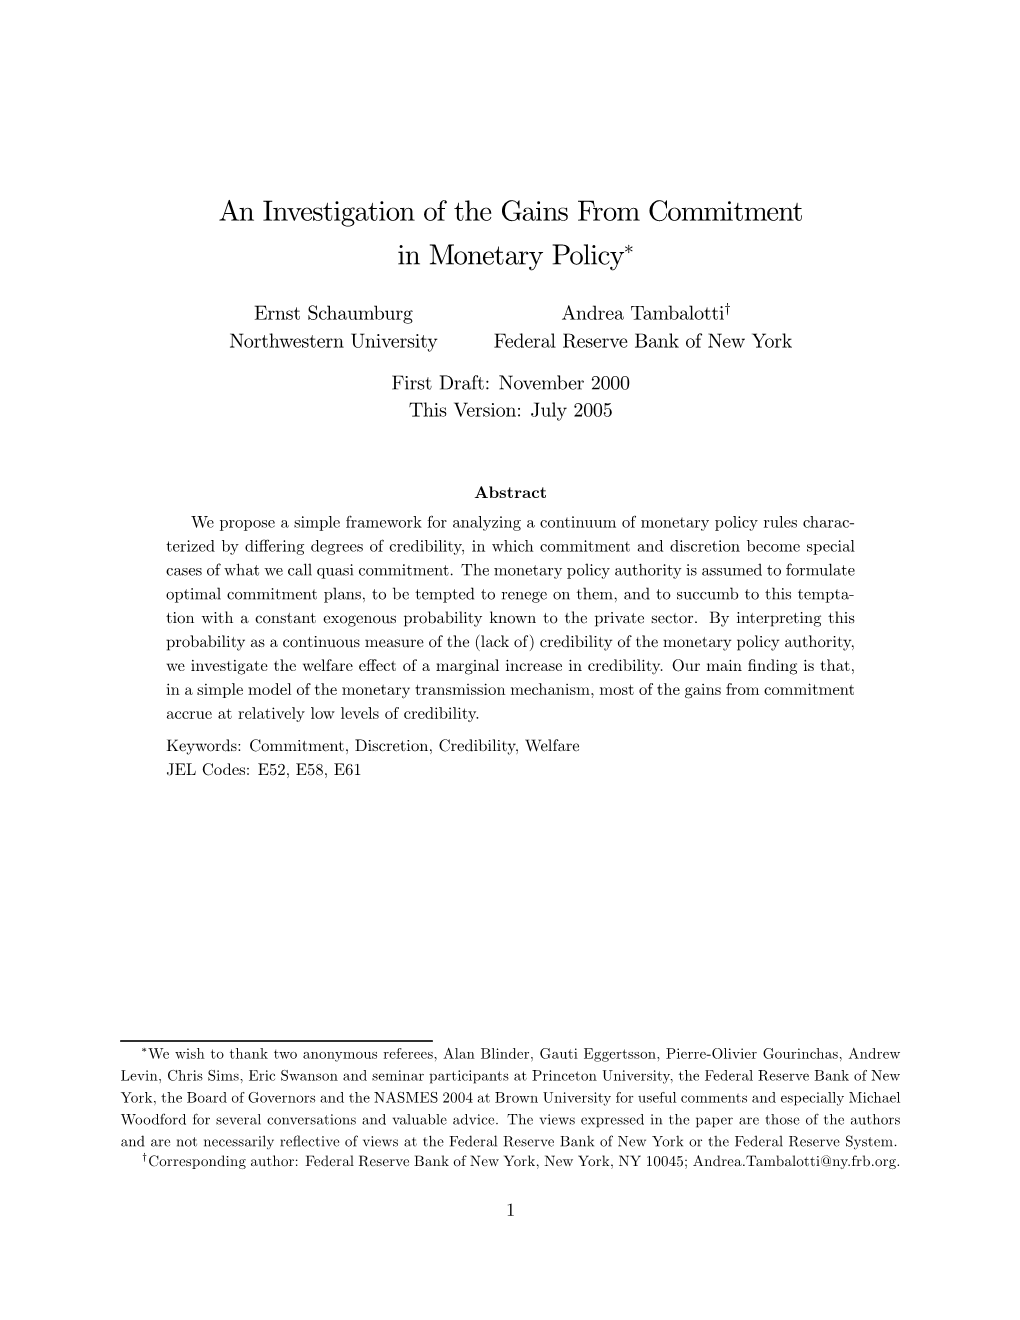 An Investigation of the Gains from Commitment in Monetary Policy∗